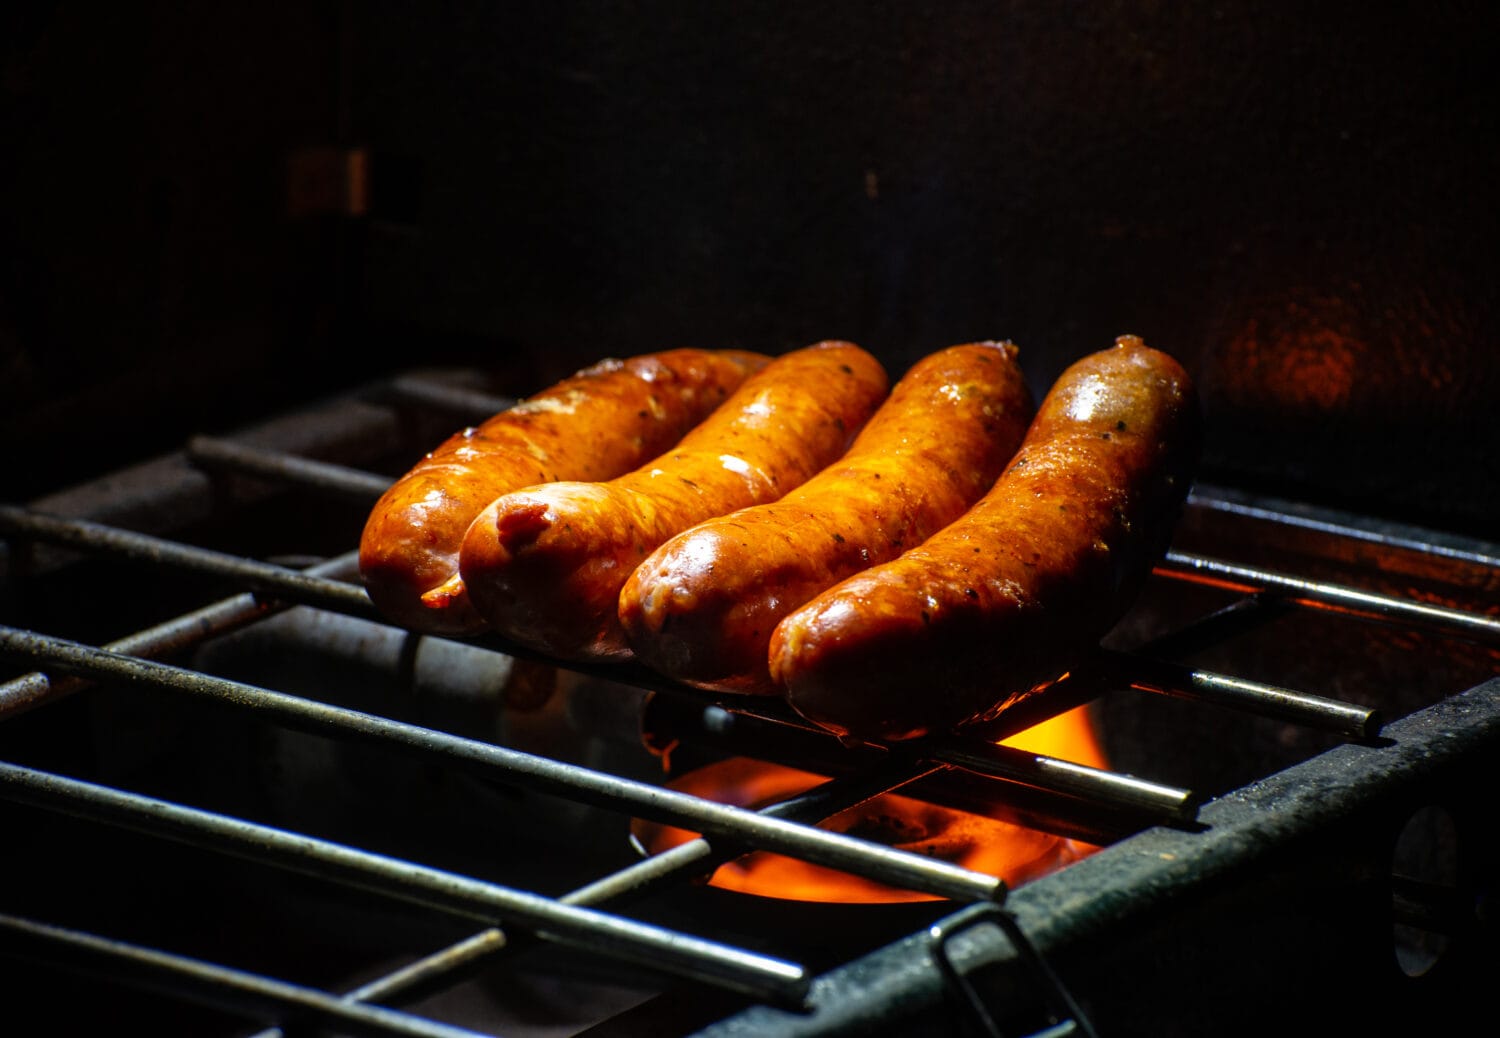 Delicious Andouille pork sausages being grilled over open flame on a camp stove with metal grill.